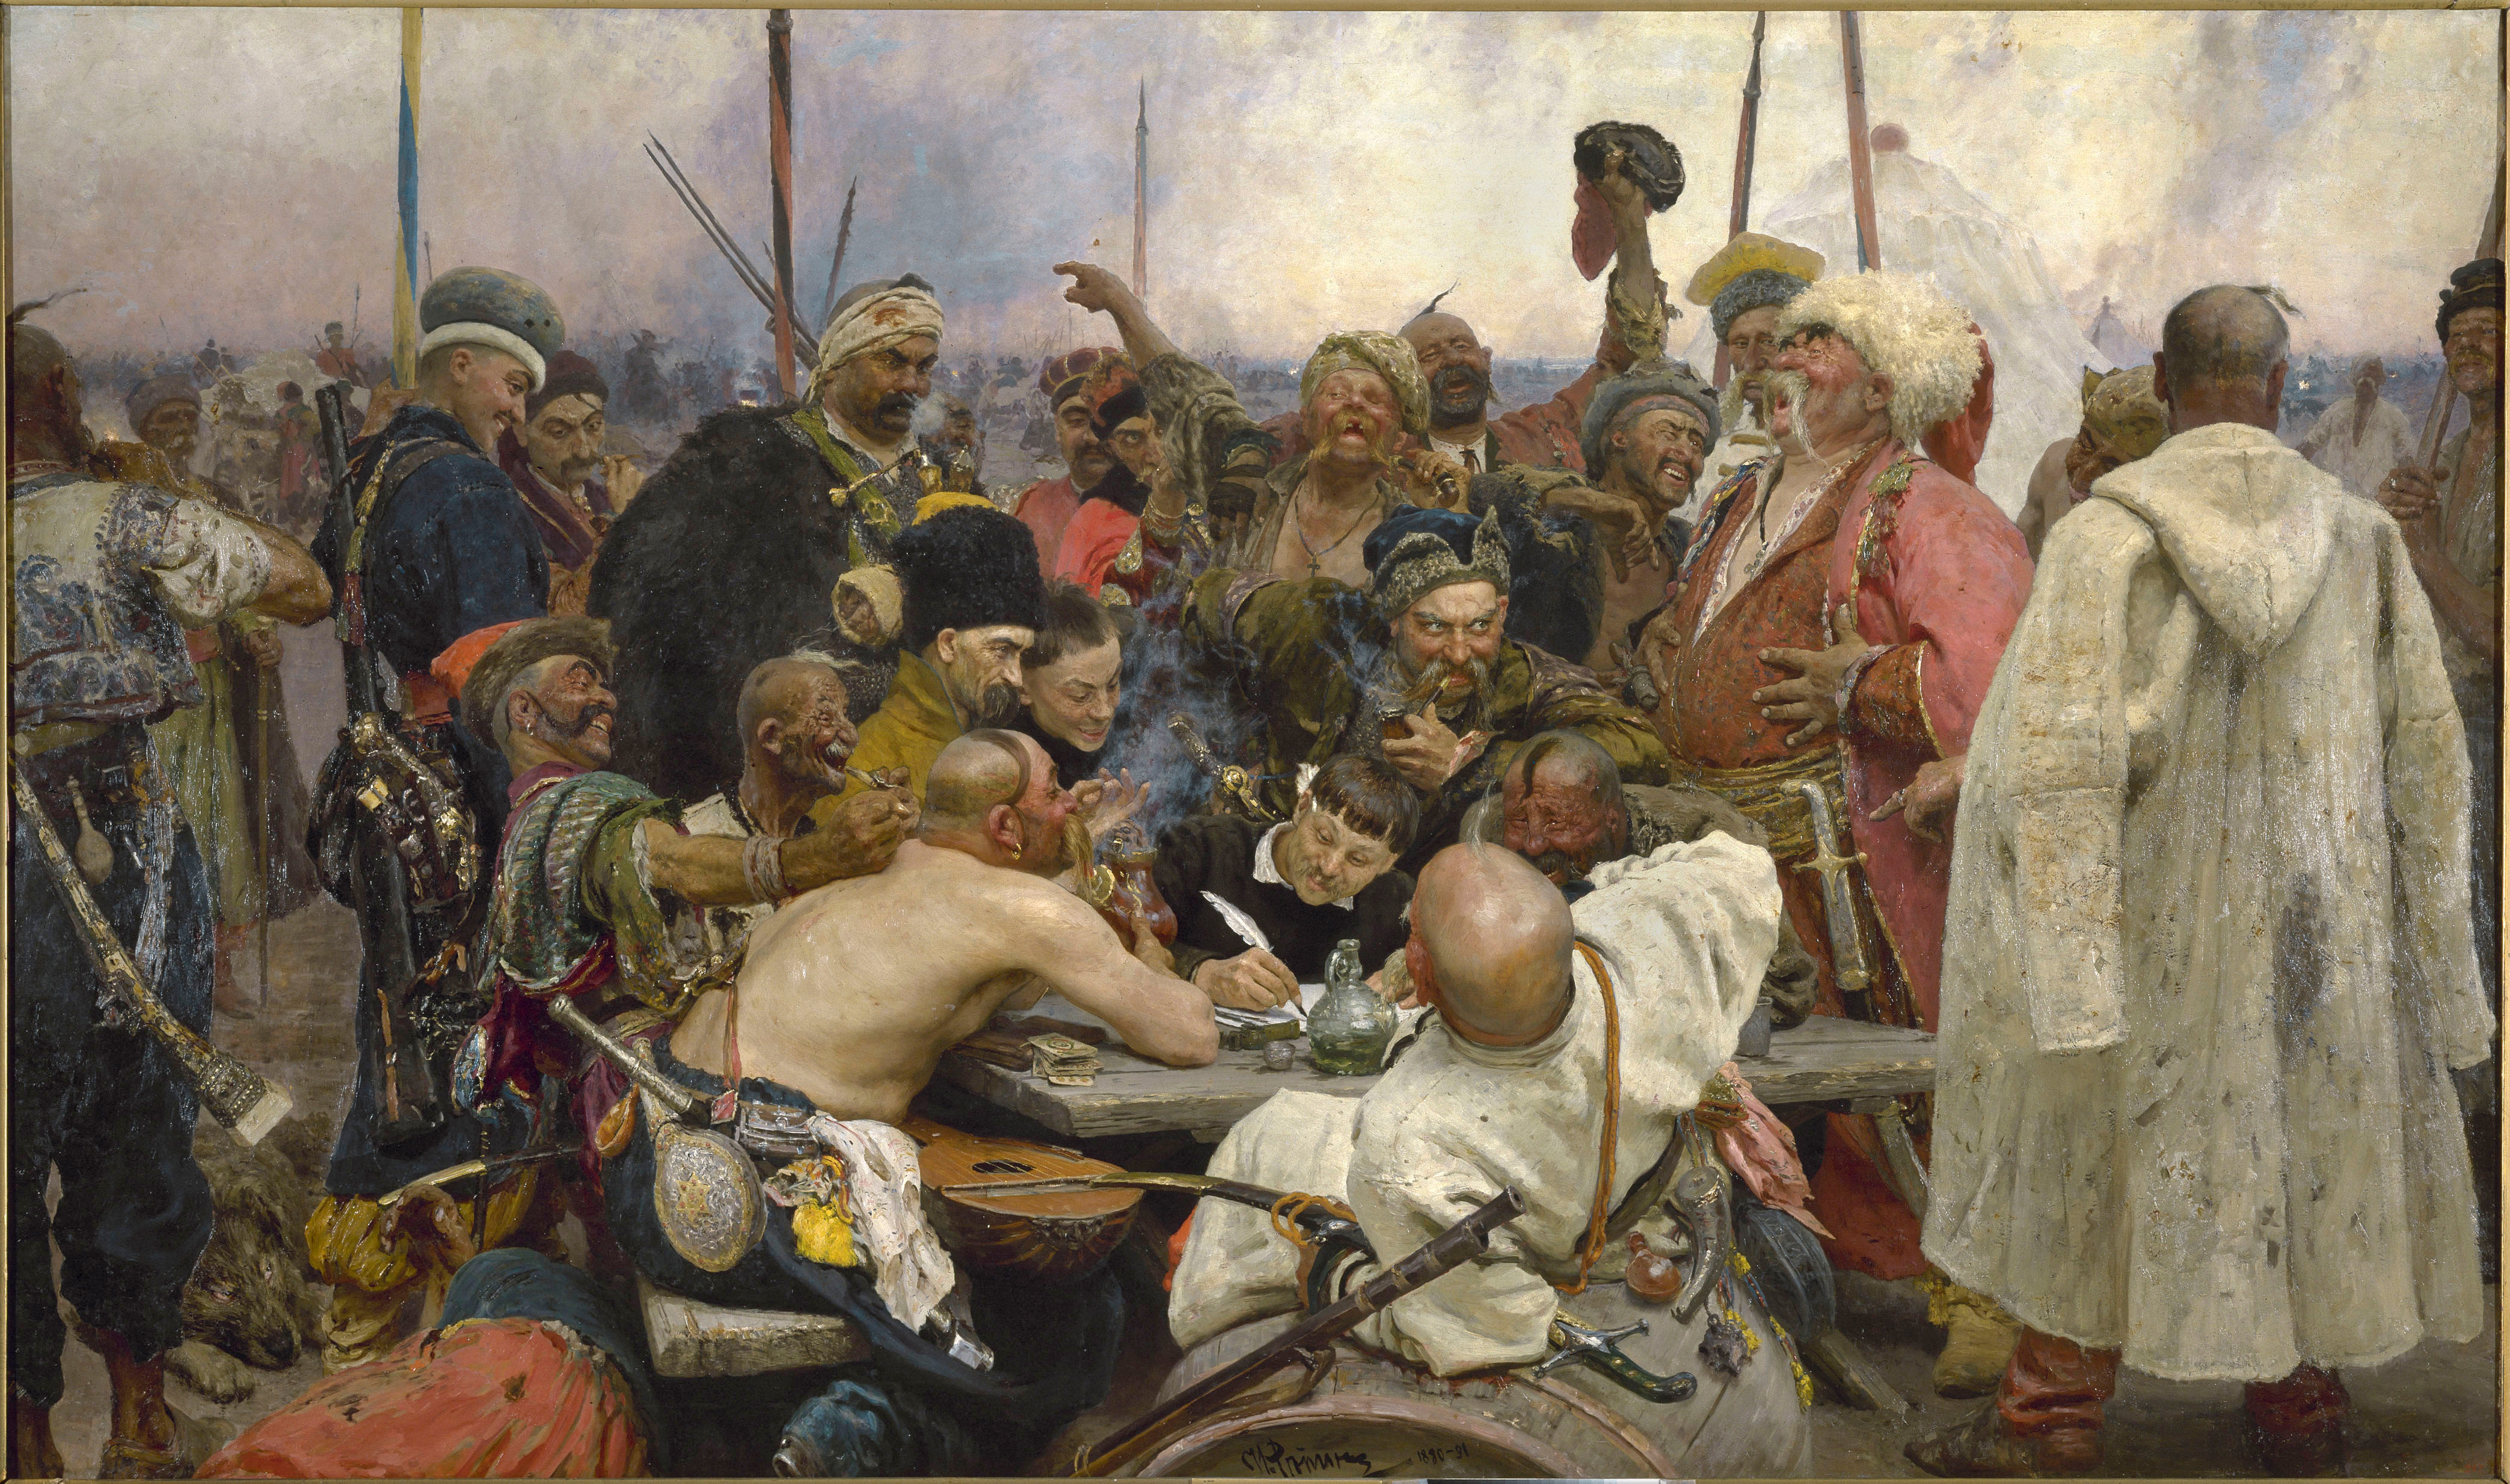 The Deluge: Khmelnytsky Uprising; the Battle of Beresteczko ends with a Polish victory